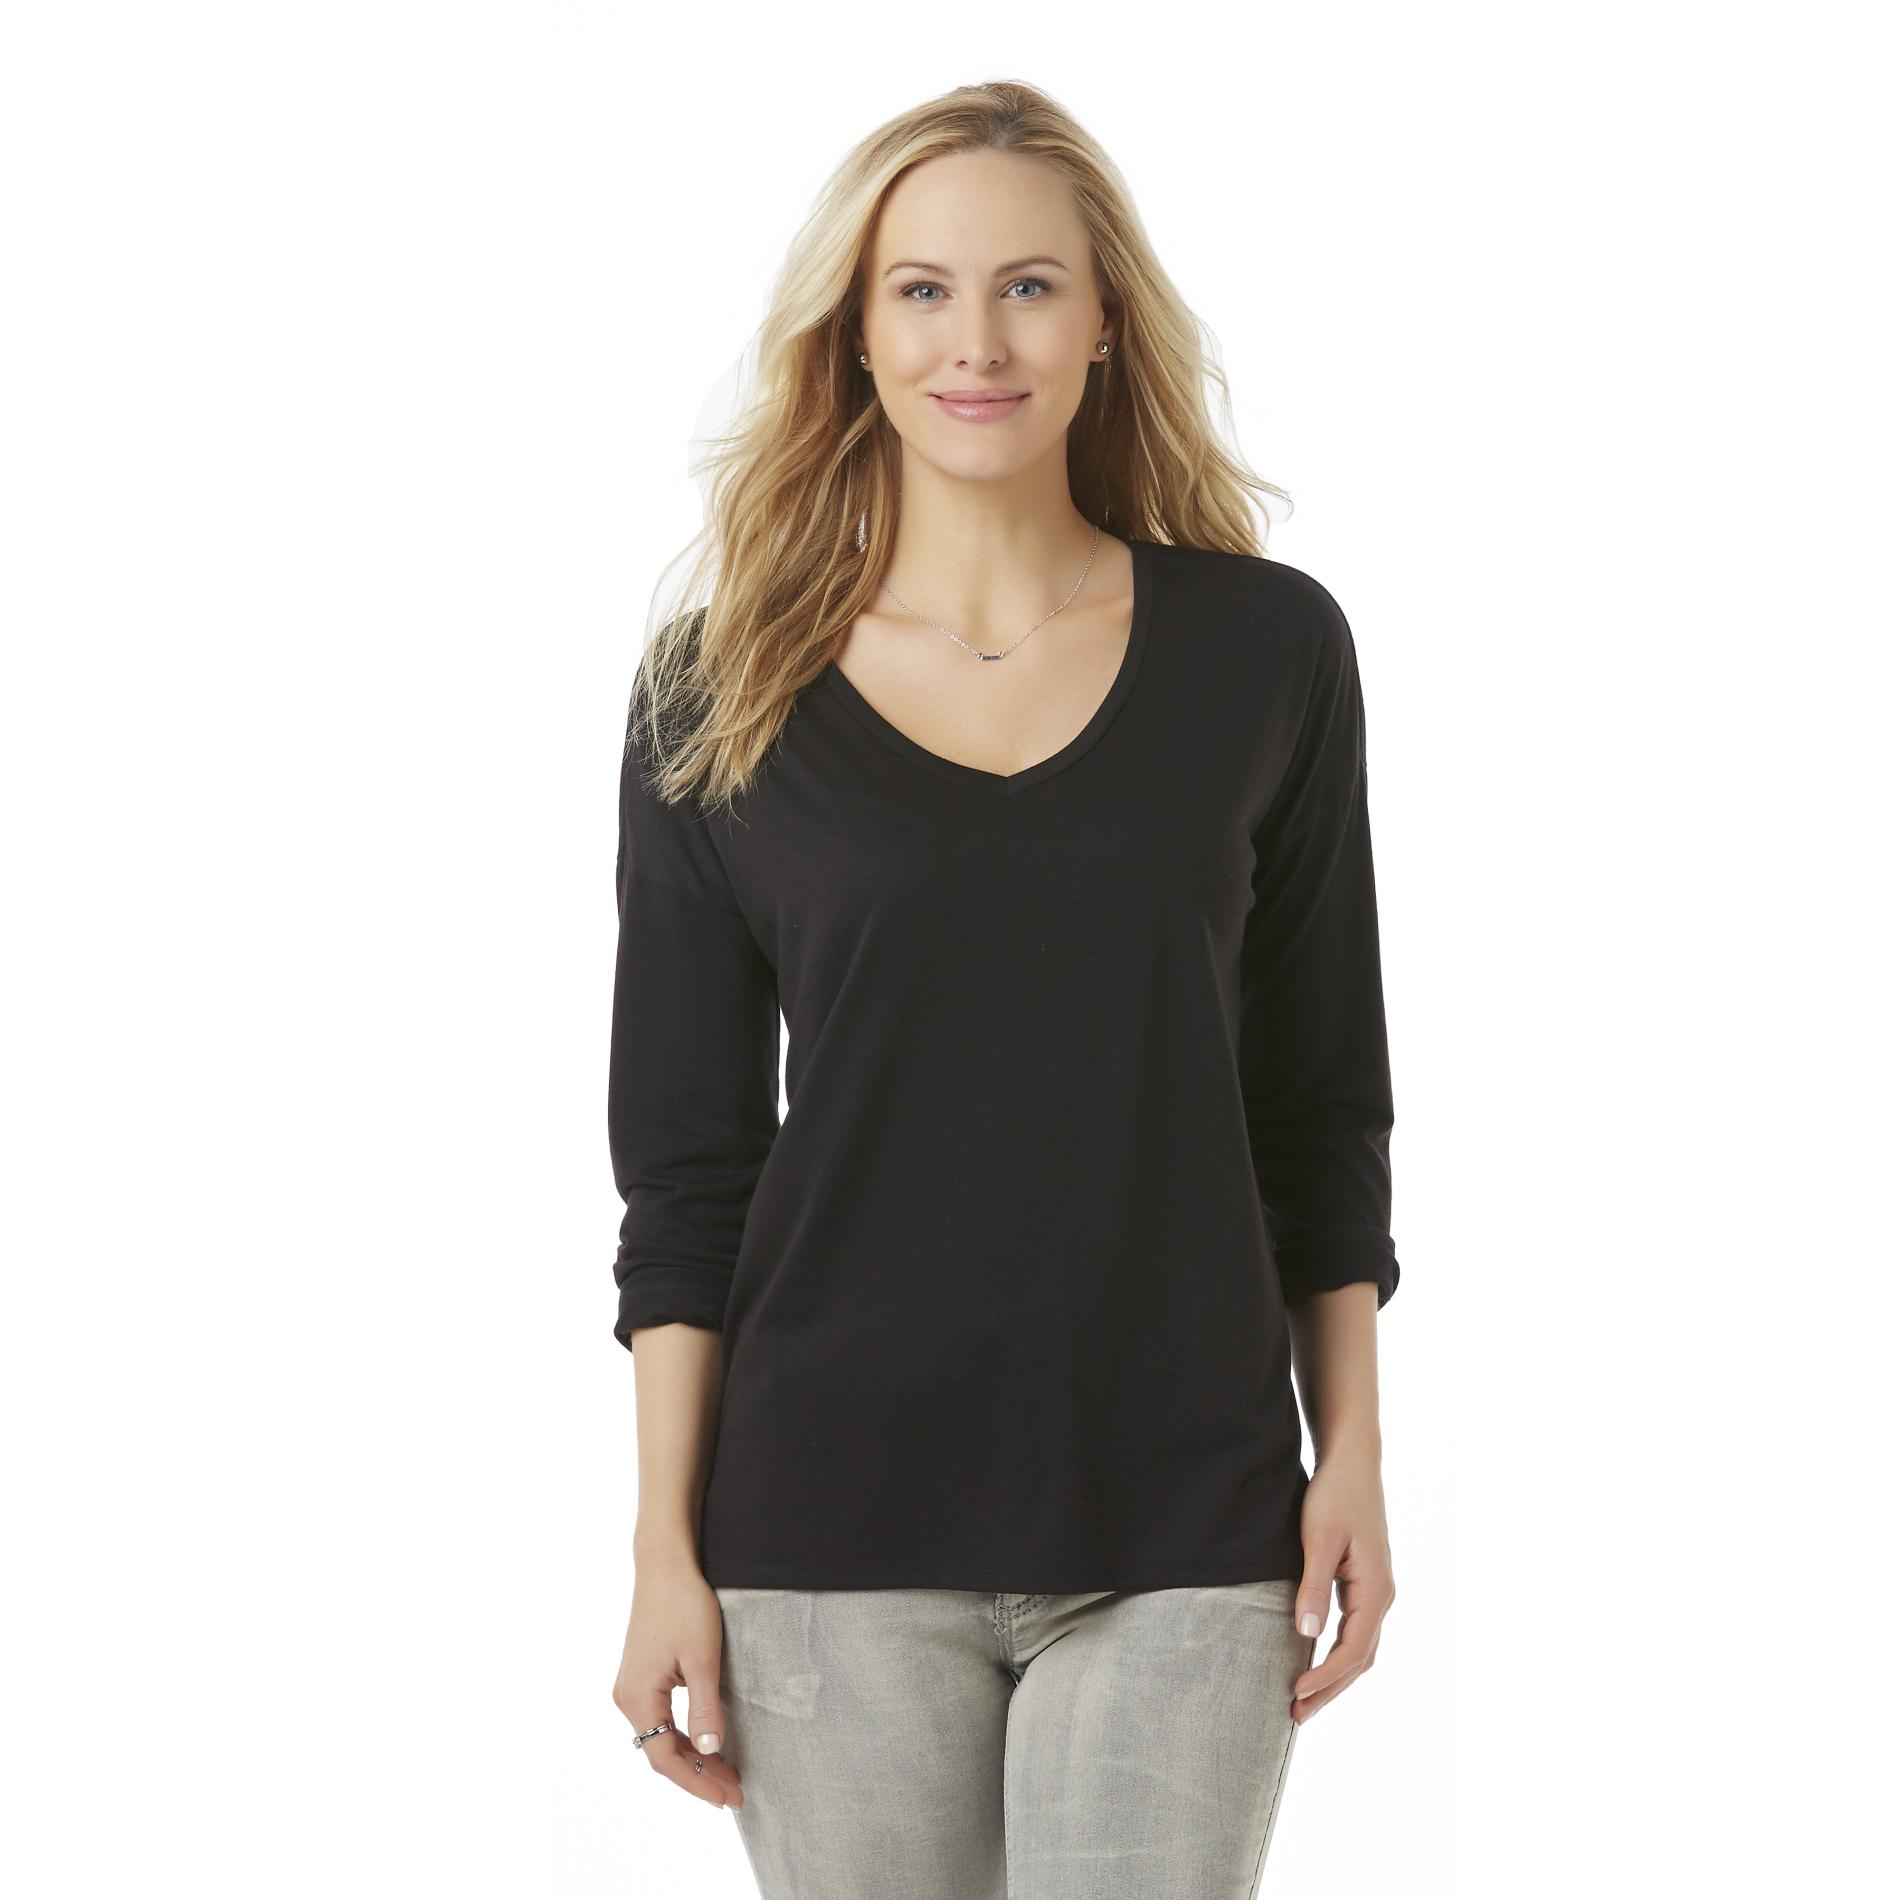 Simply Styled Women's V-Neck Top